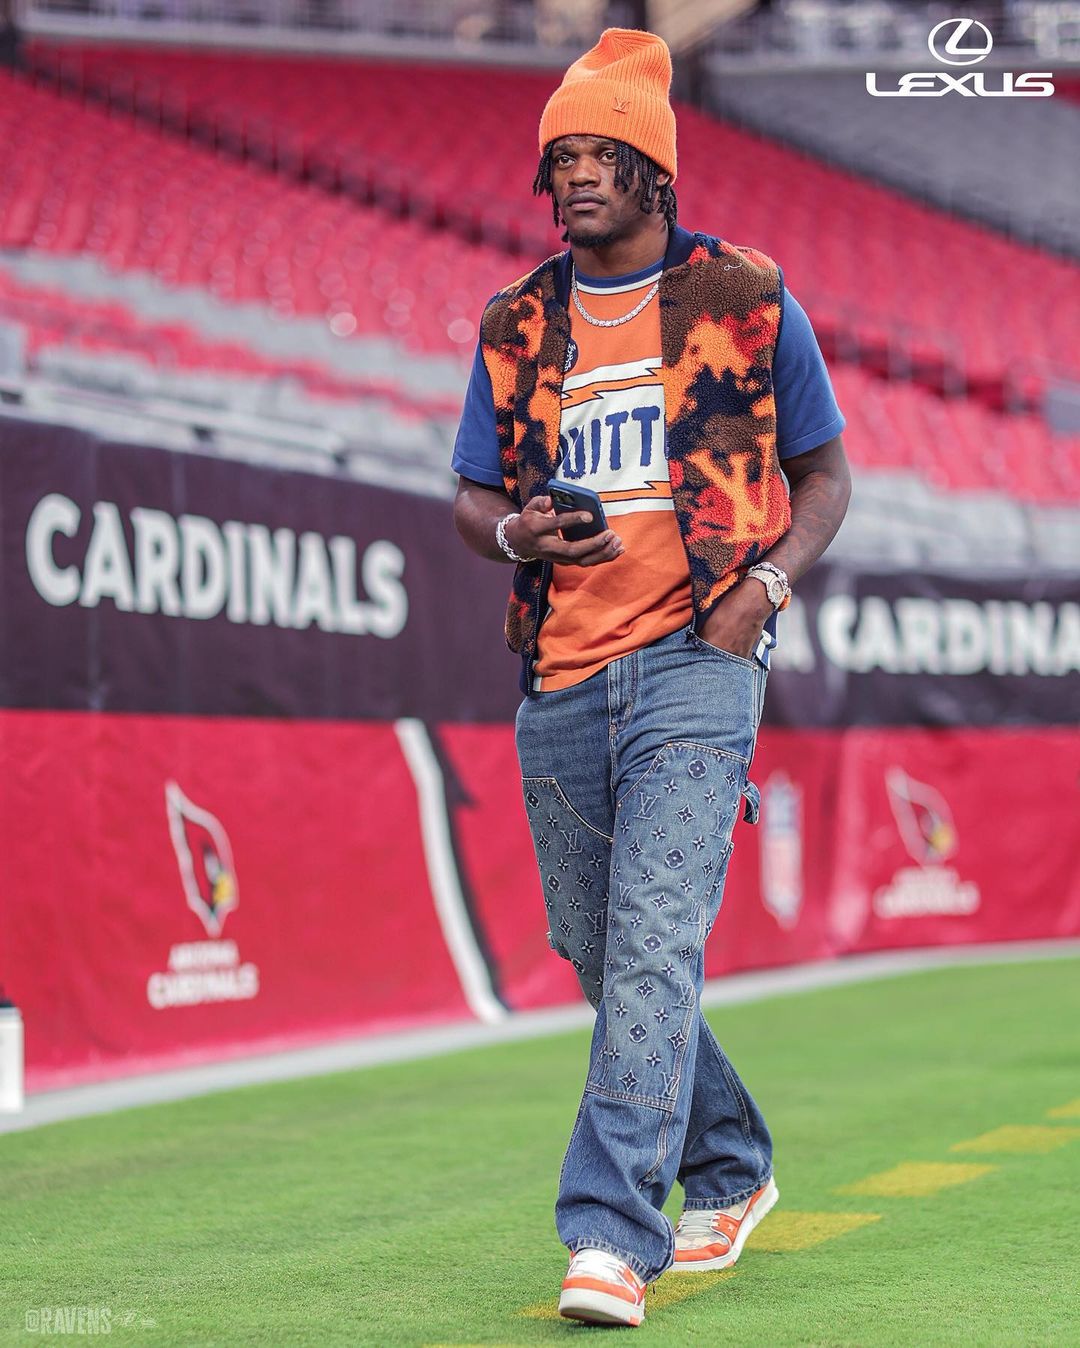 Fall in love with the street style of Baltimore Ravens players